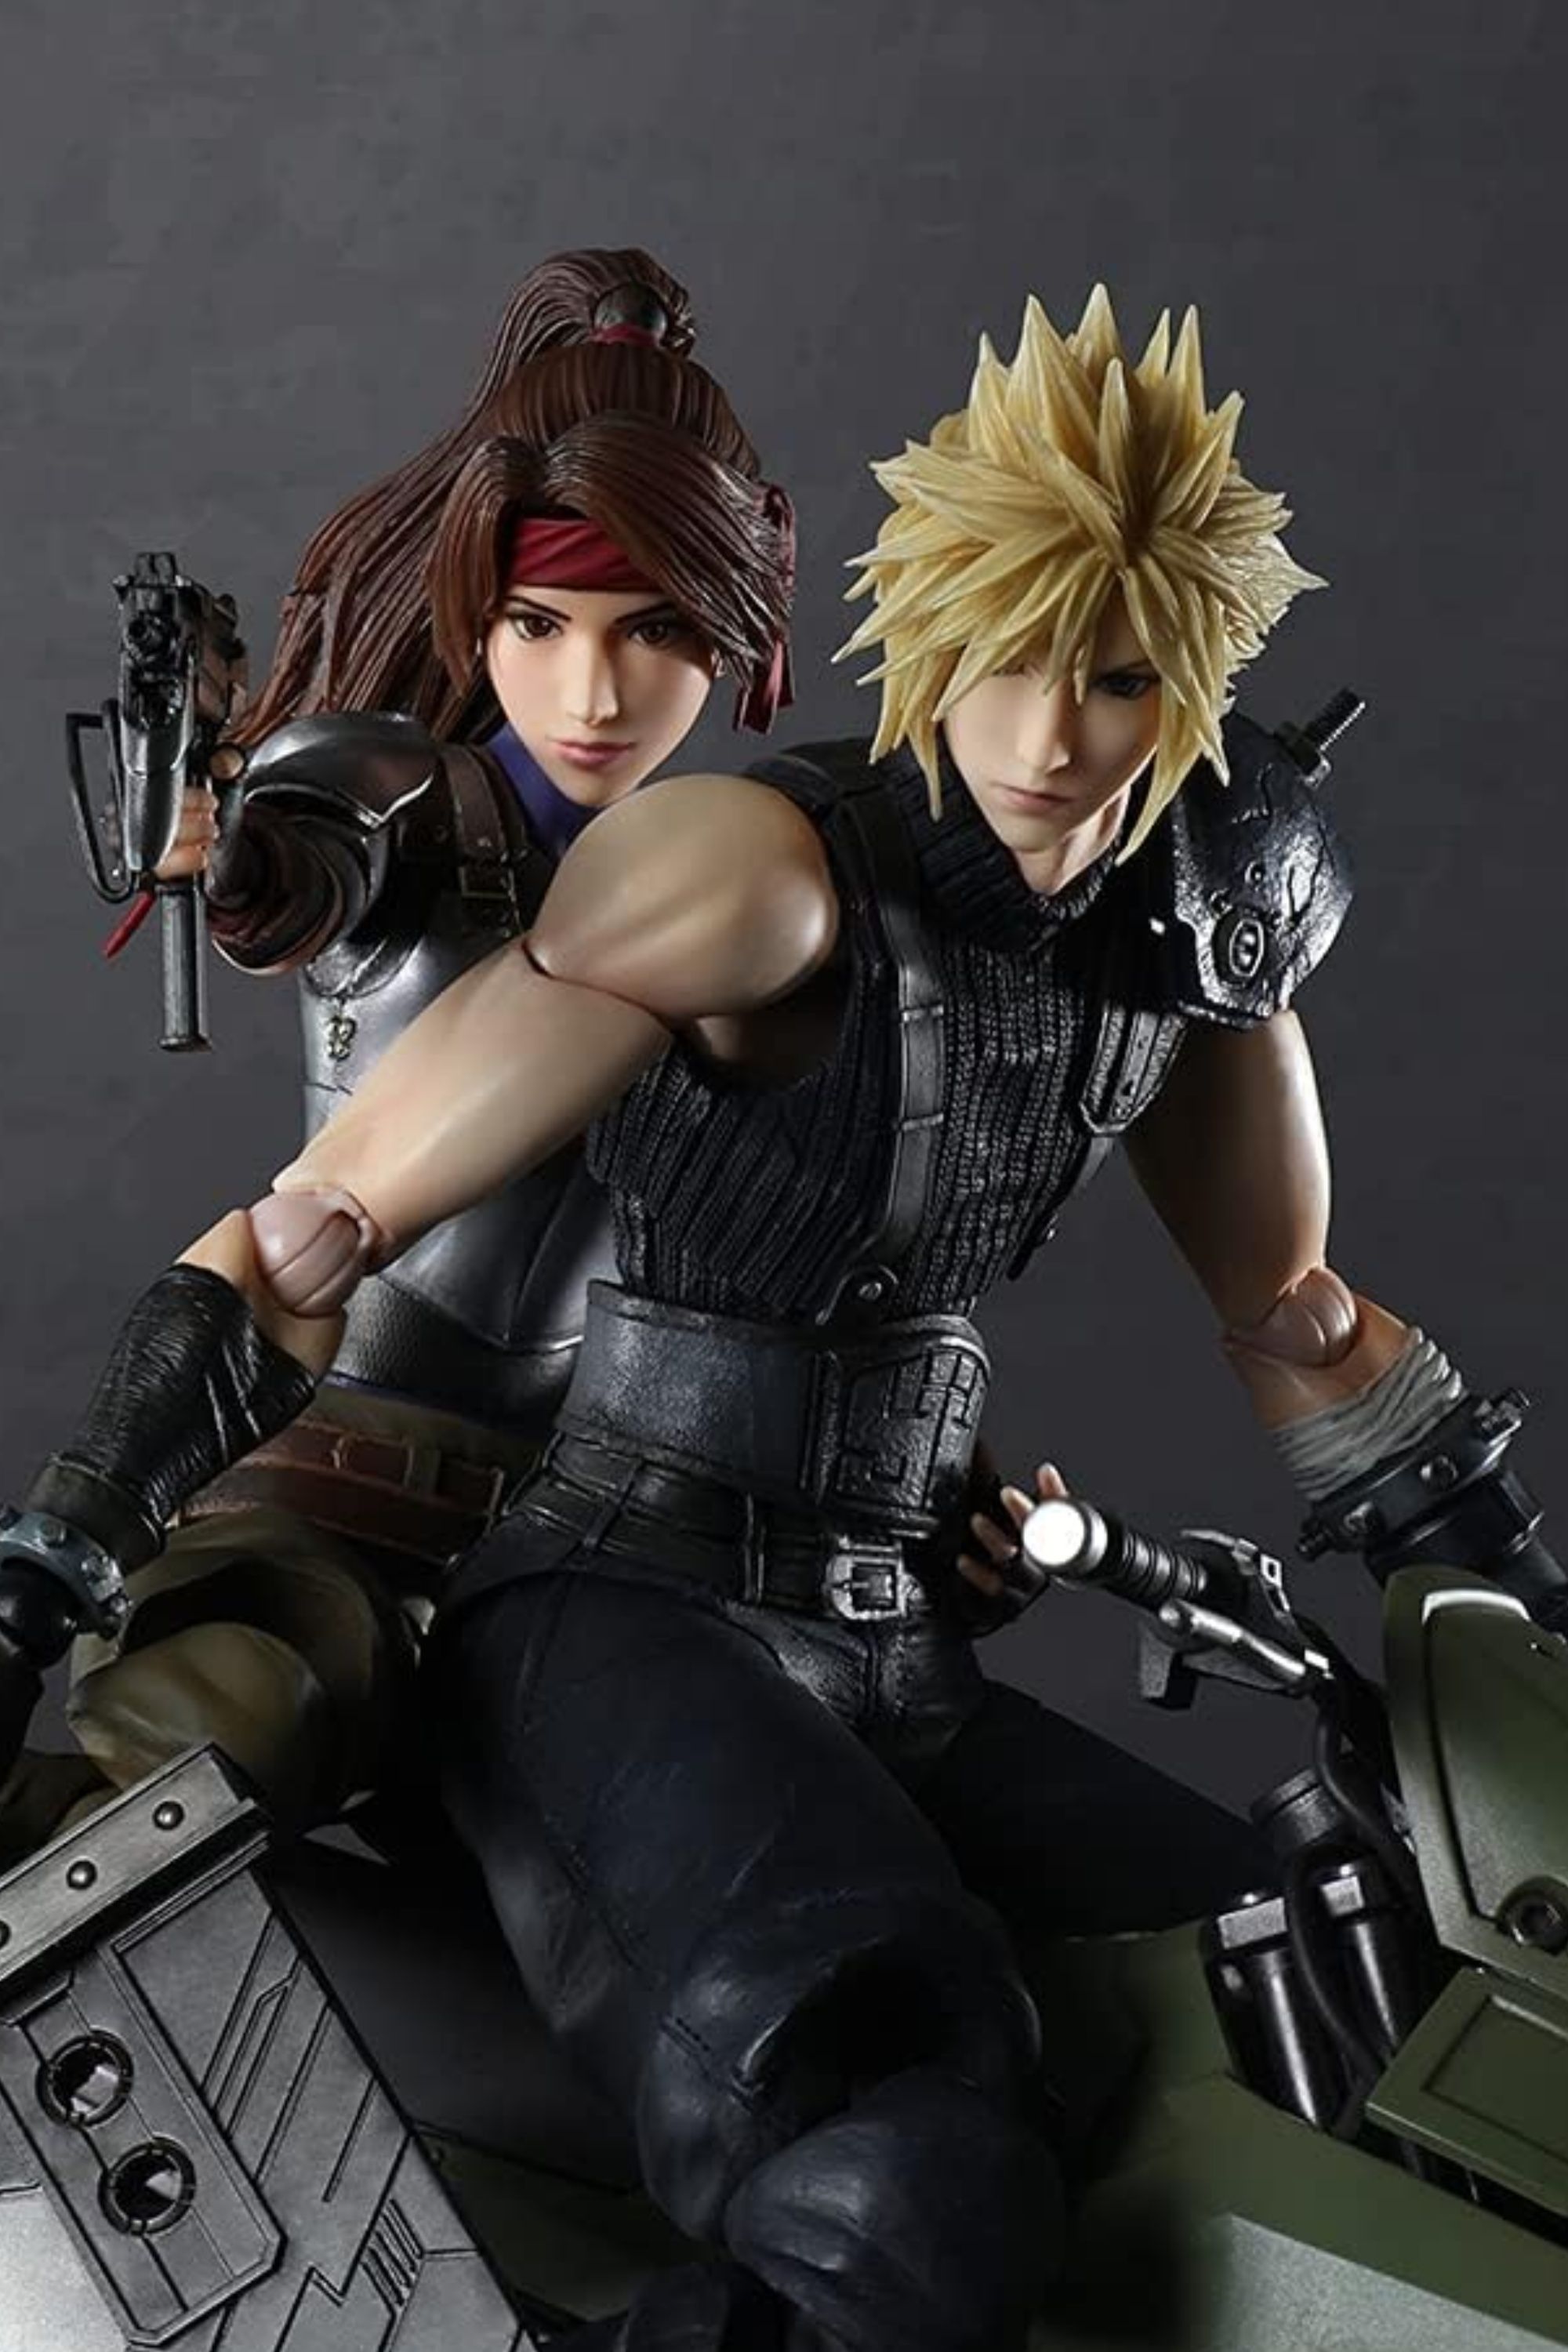 Select Final Fantasy 7 Figures Discounted On